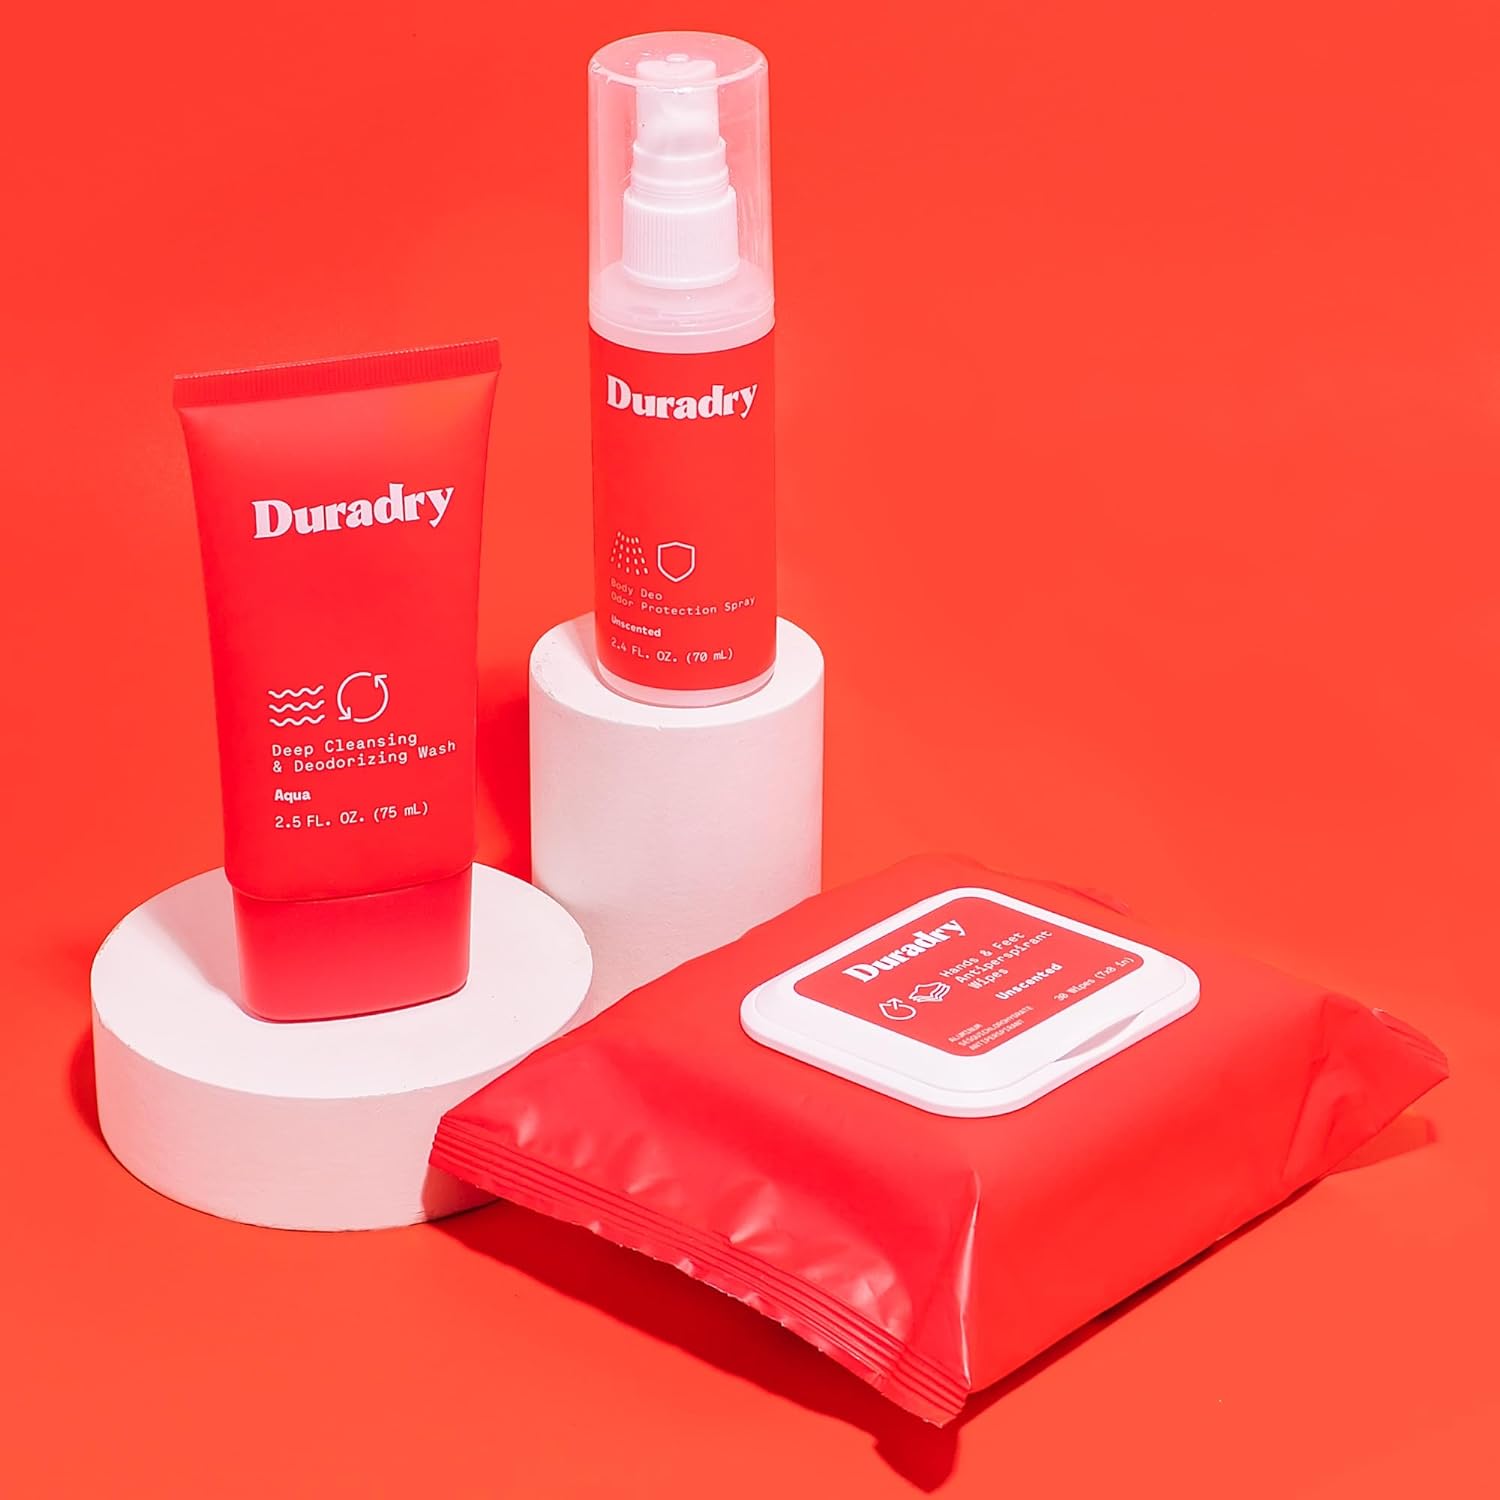 Duradry Feet System - Stops Sweaty Feet, Helps Control Foot Odor & Sweat, Infused with Vitamins and Minerals, Dermatologist Recommended - Body Wash, Antiperspirant Wipes, Body Deodorant Spray : Beauty & Personal Care